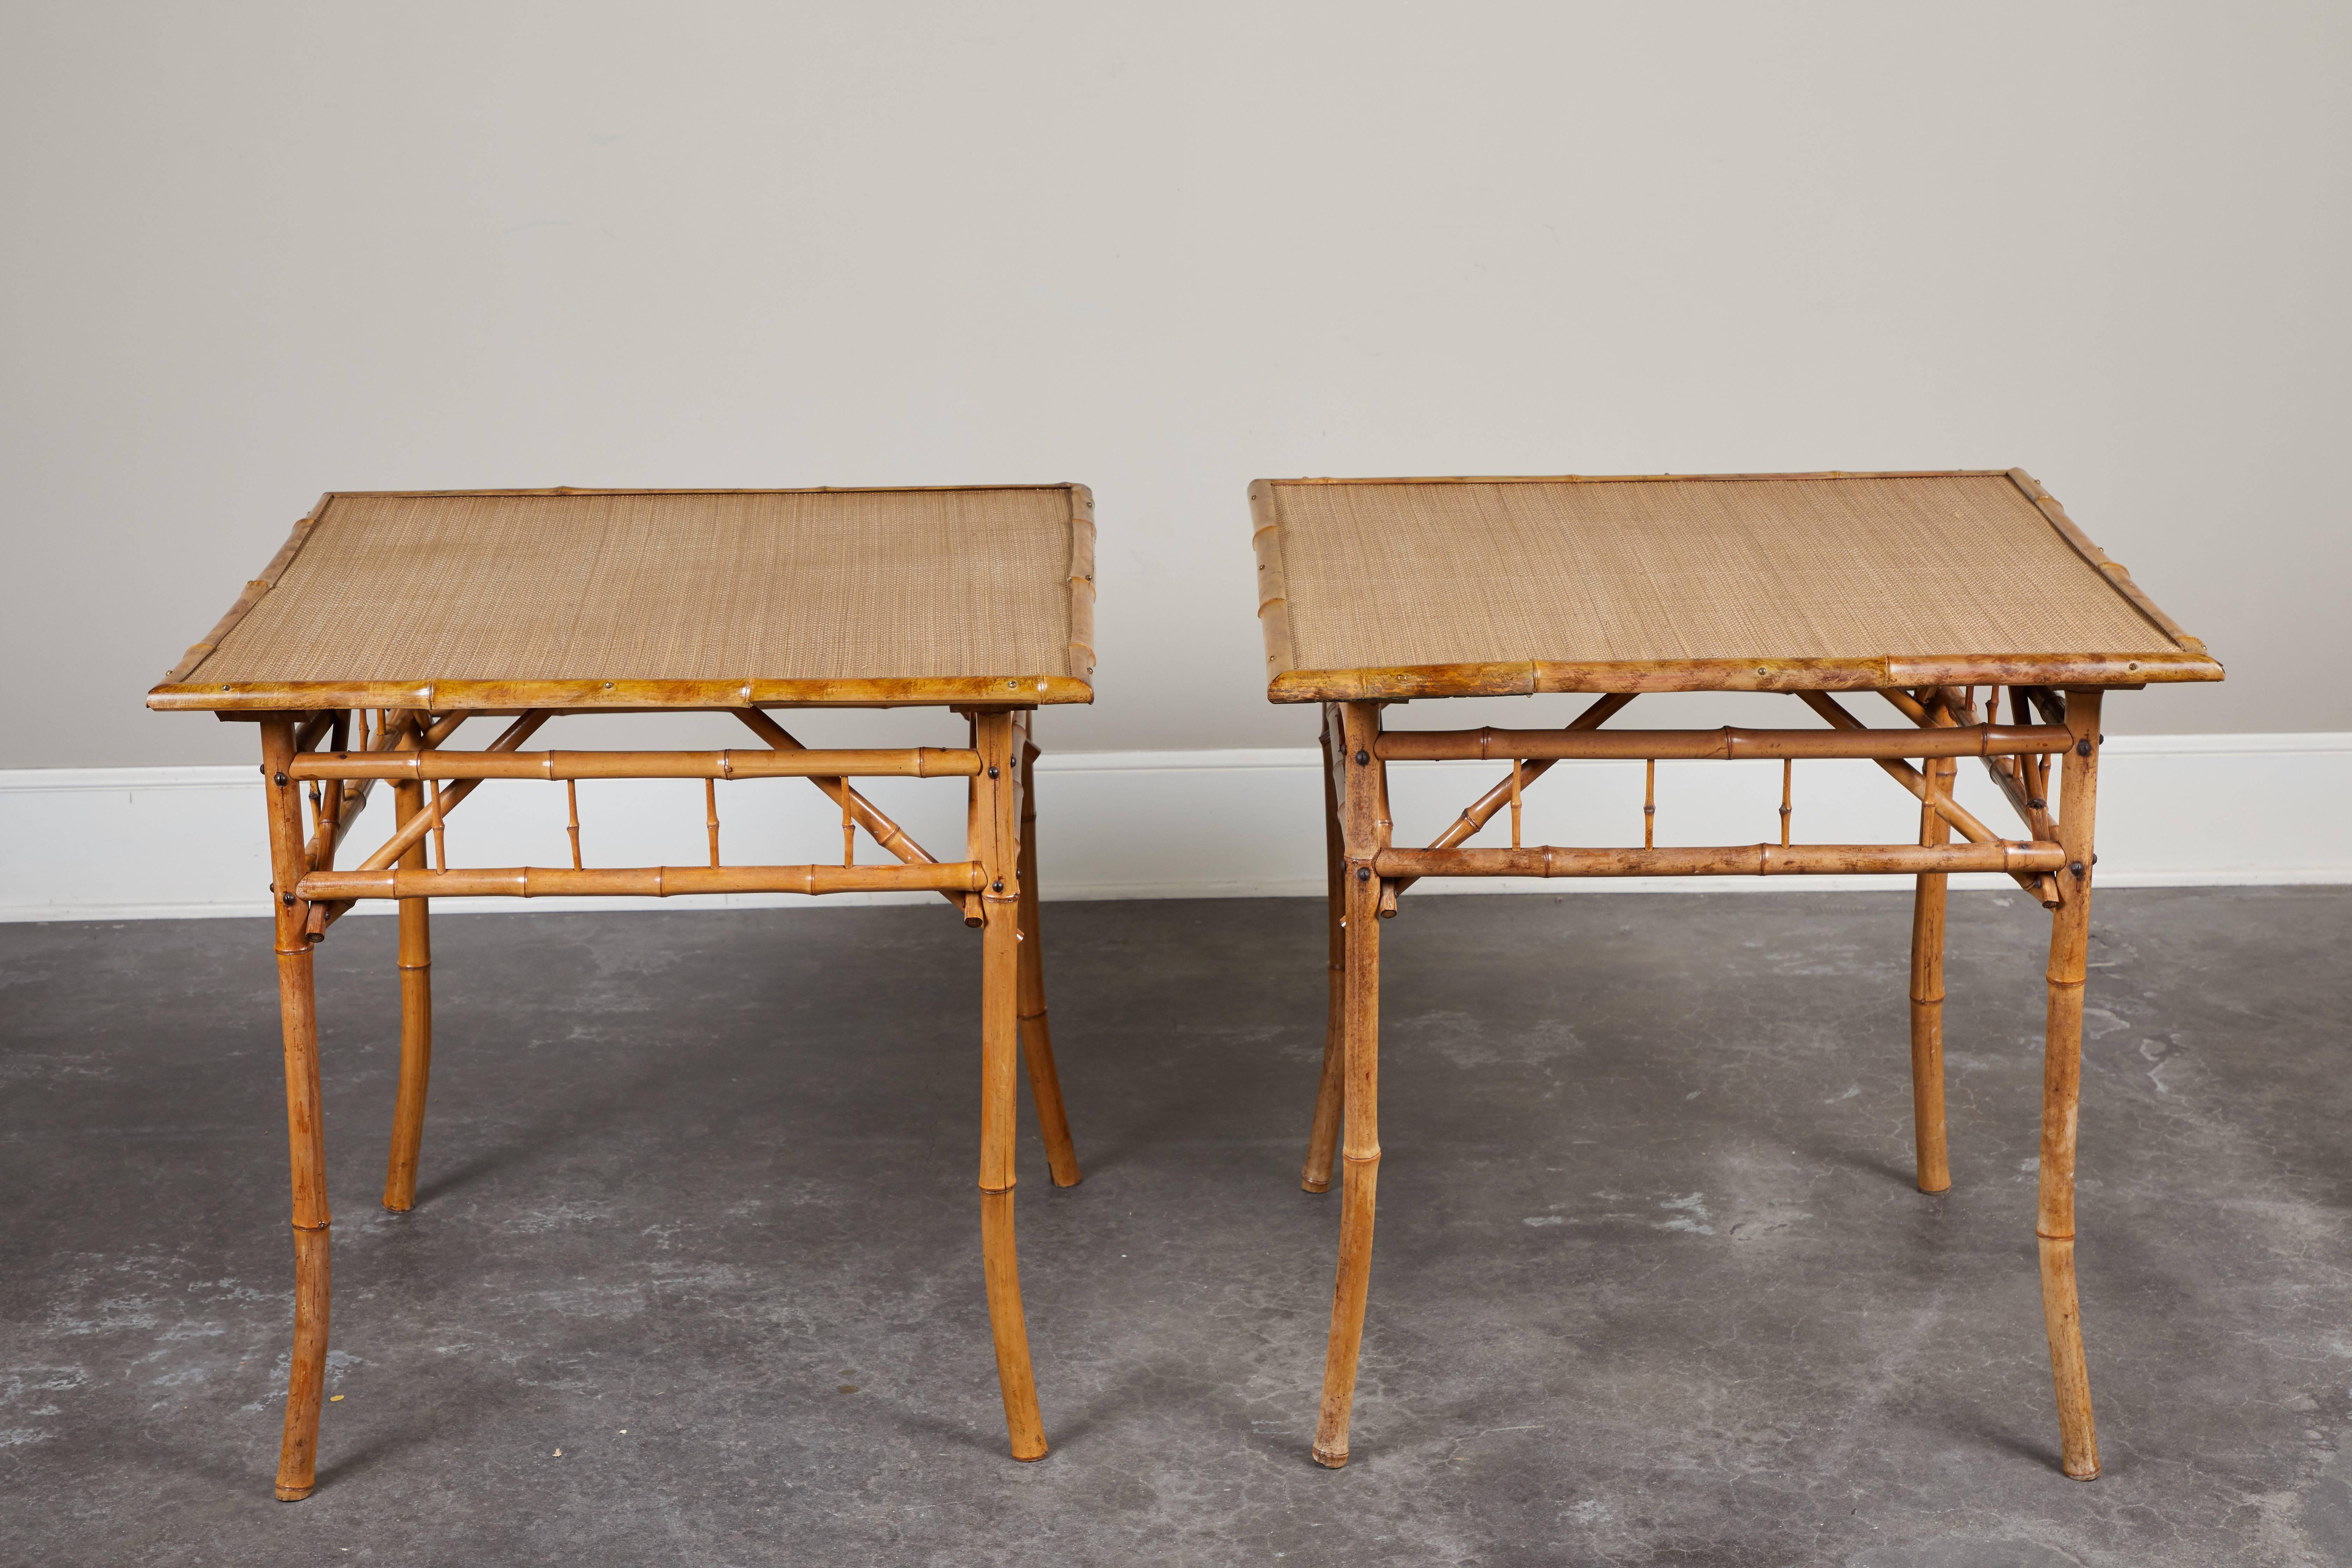 A pair of square Danish side table, circa early 20th century.  Great use as card table, end table, or paired together as a buffet in a gorgeous sunroom.  Light and airy aesthetic, with a handmade, rustic quality.